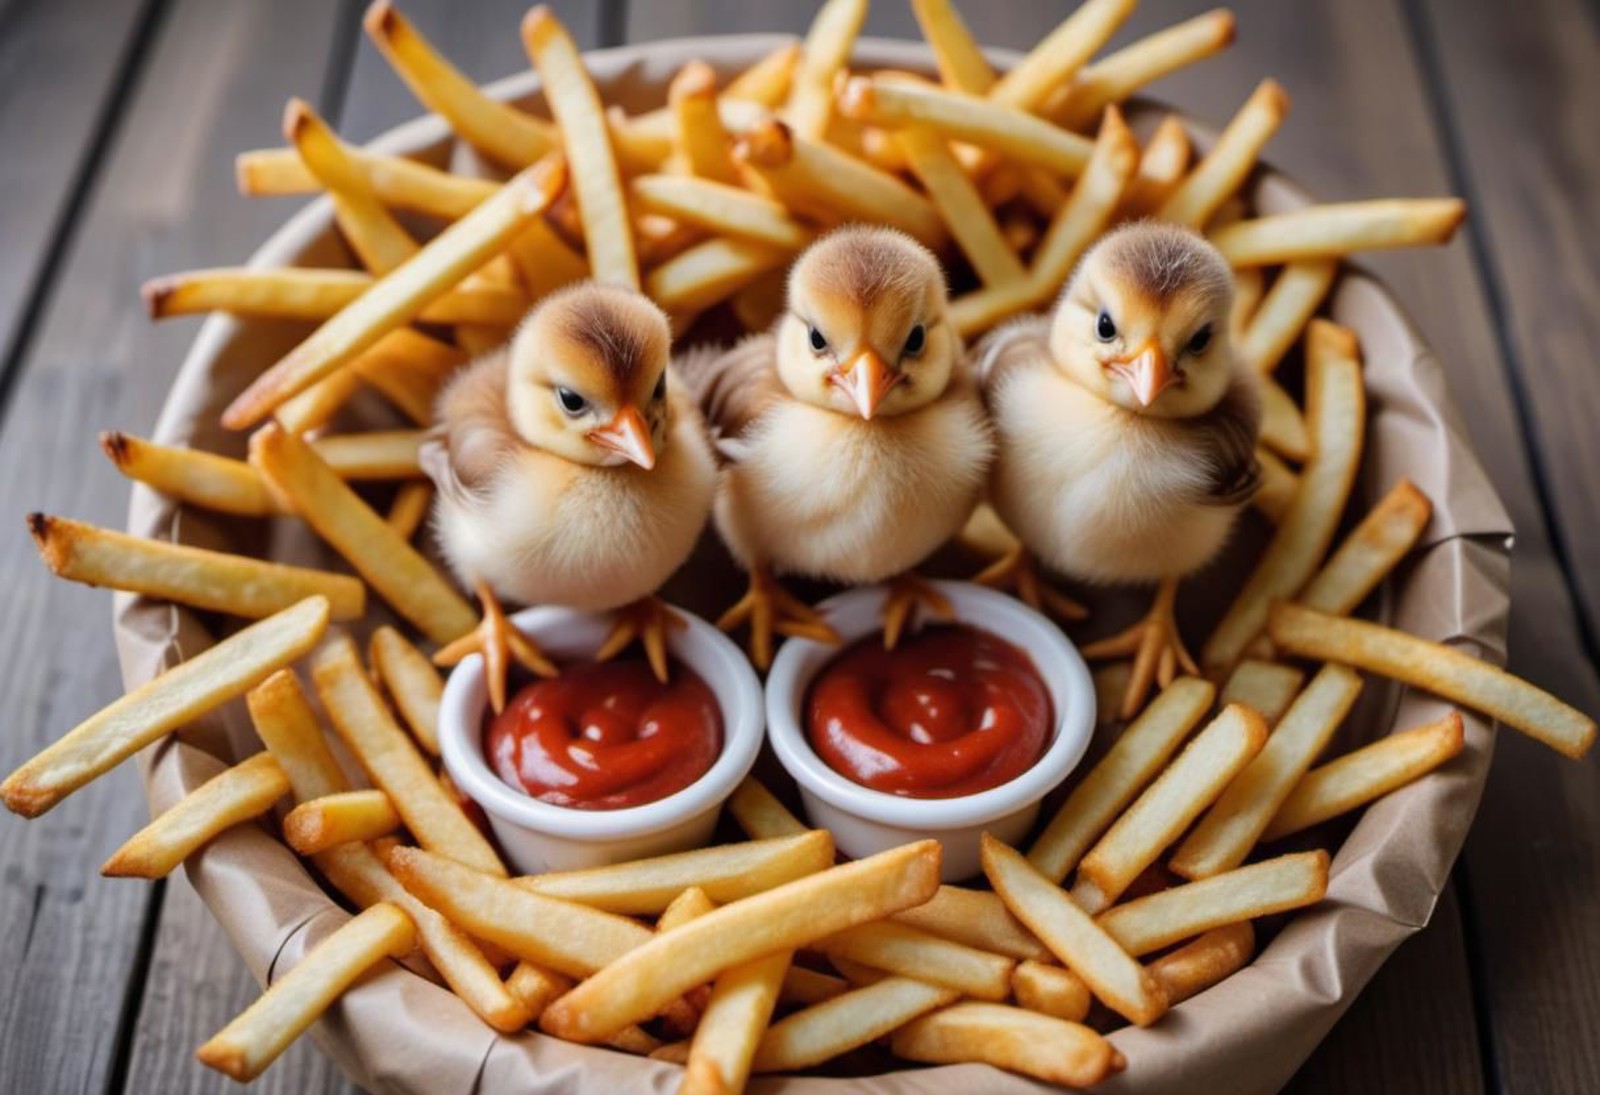 birds feeding chicks ketchup in a nest made of  french fries, french fries nest